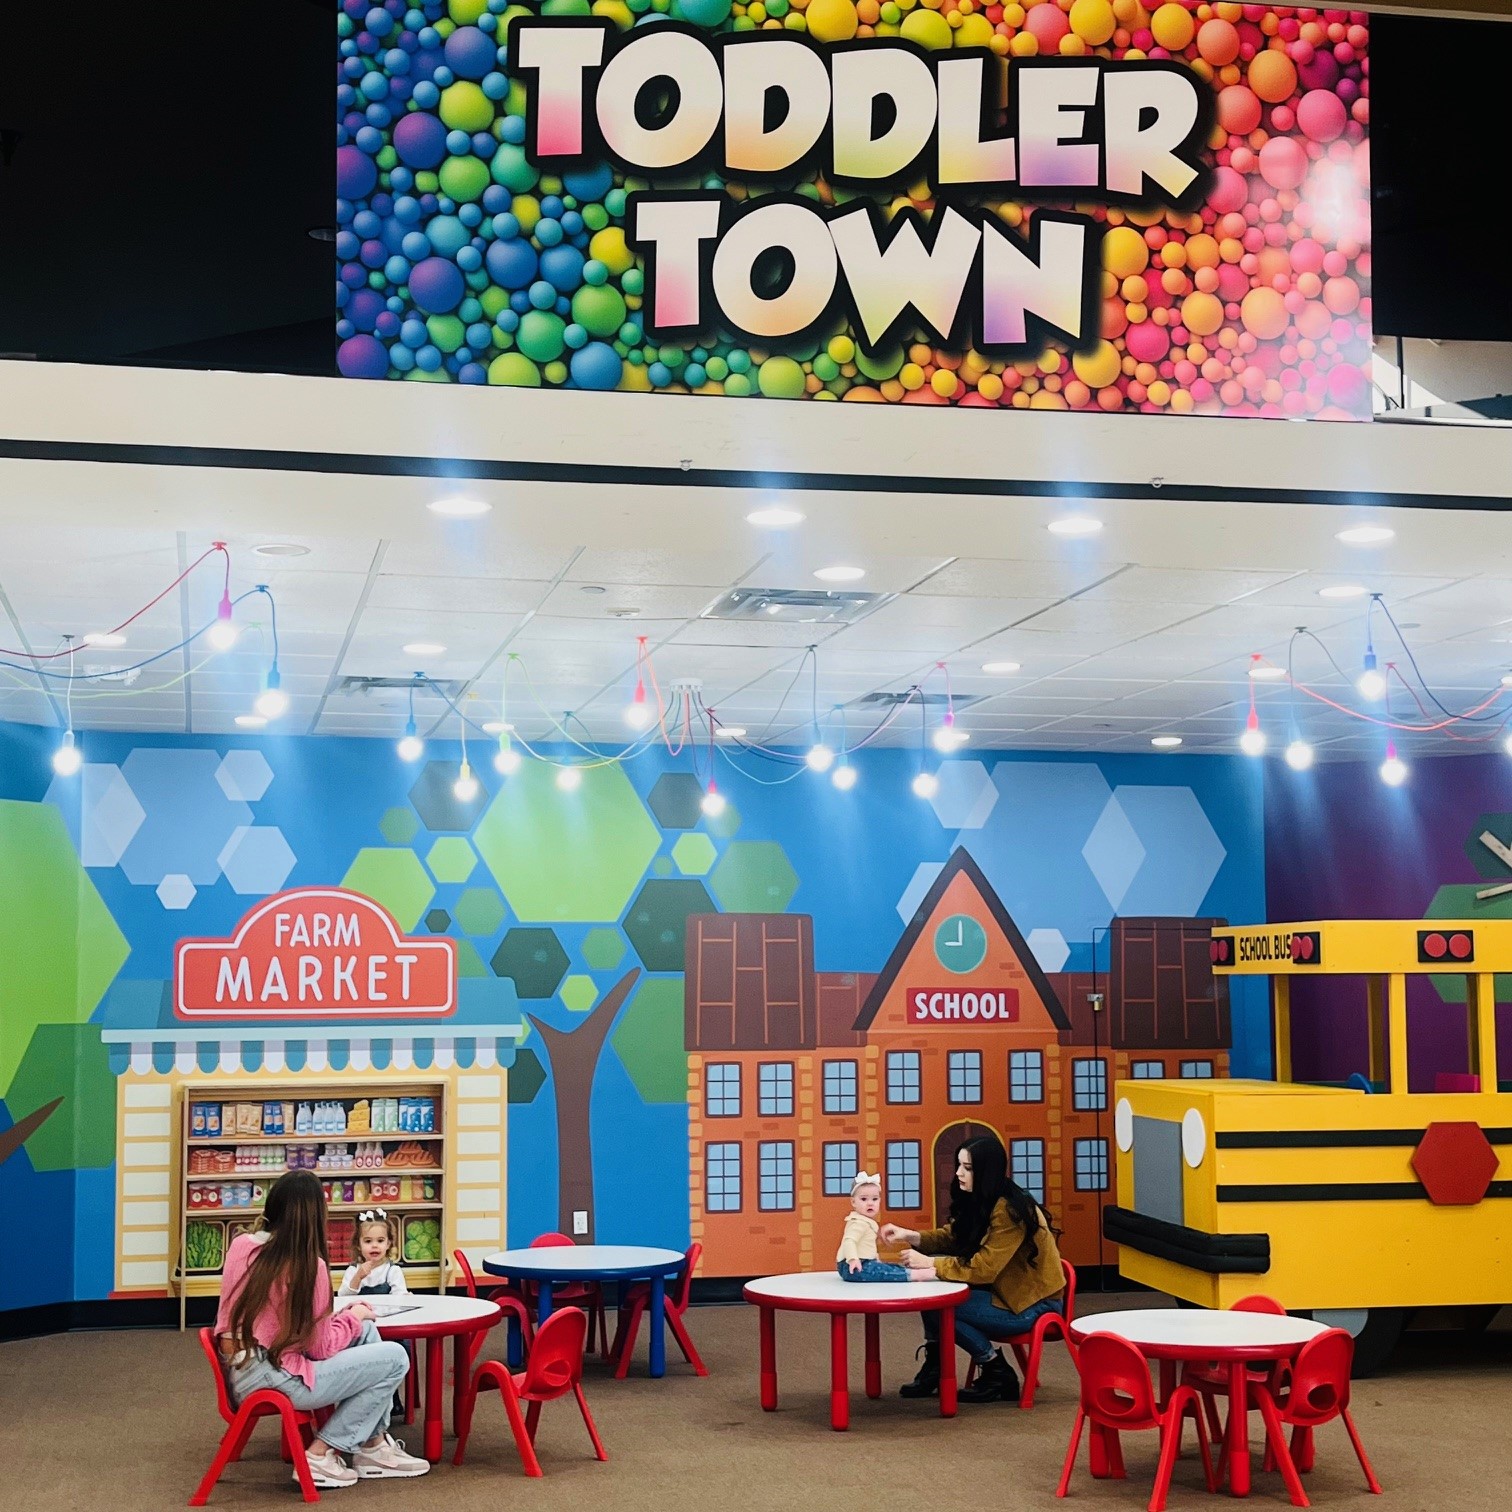 Two moms sitting with their kids in a kids space called "Toddler Town" that looks like a mini town. 